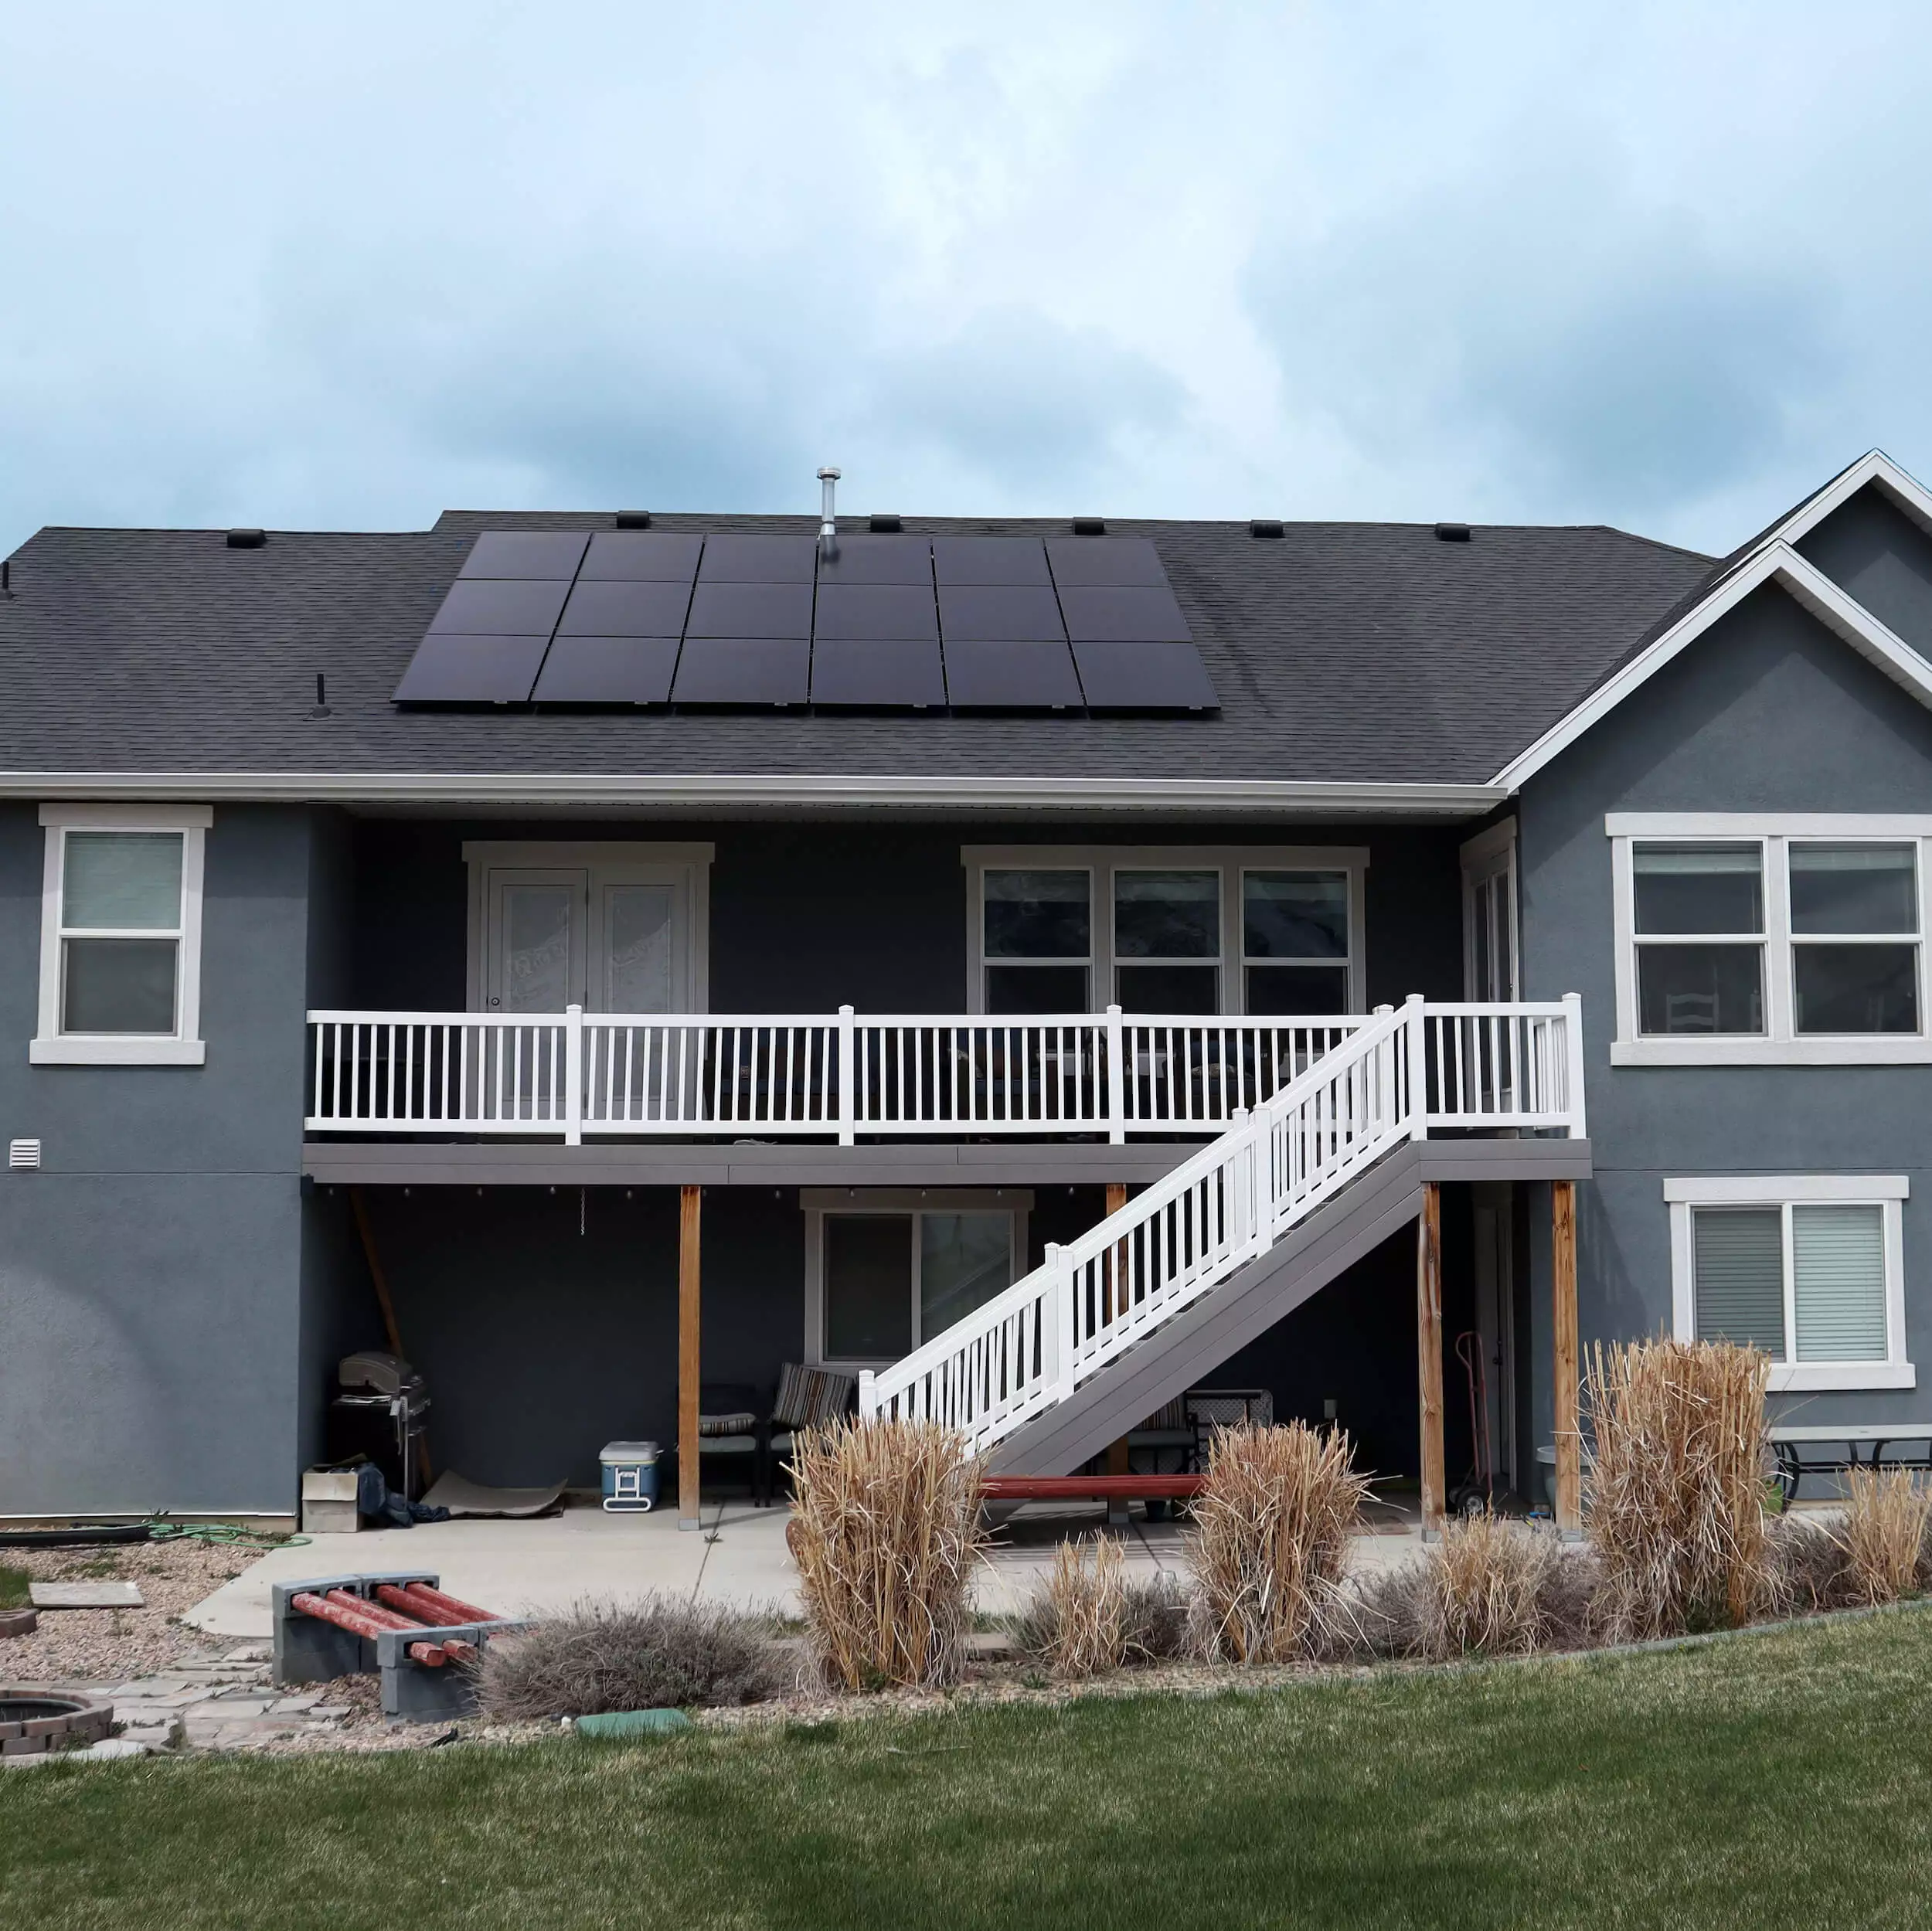 Back preview of two-story, grey-blue house with large solar panel system installed on roof